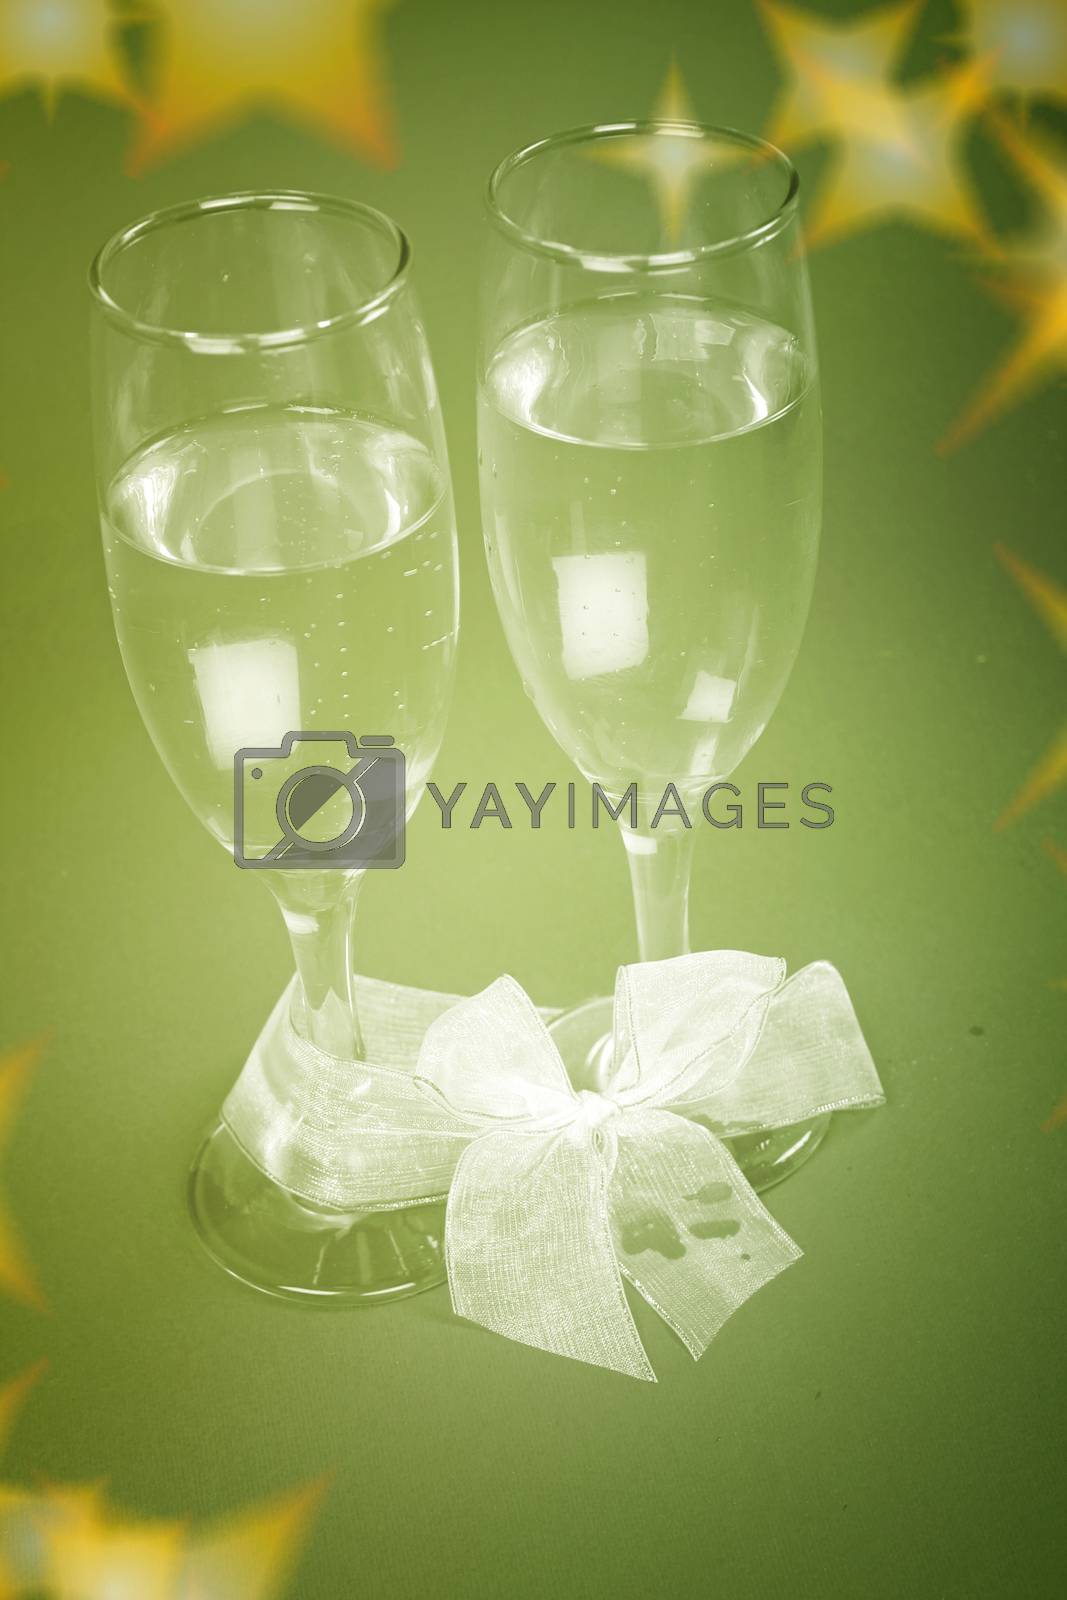 Royalty free image of Champagne by arosoft